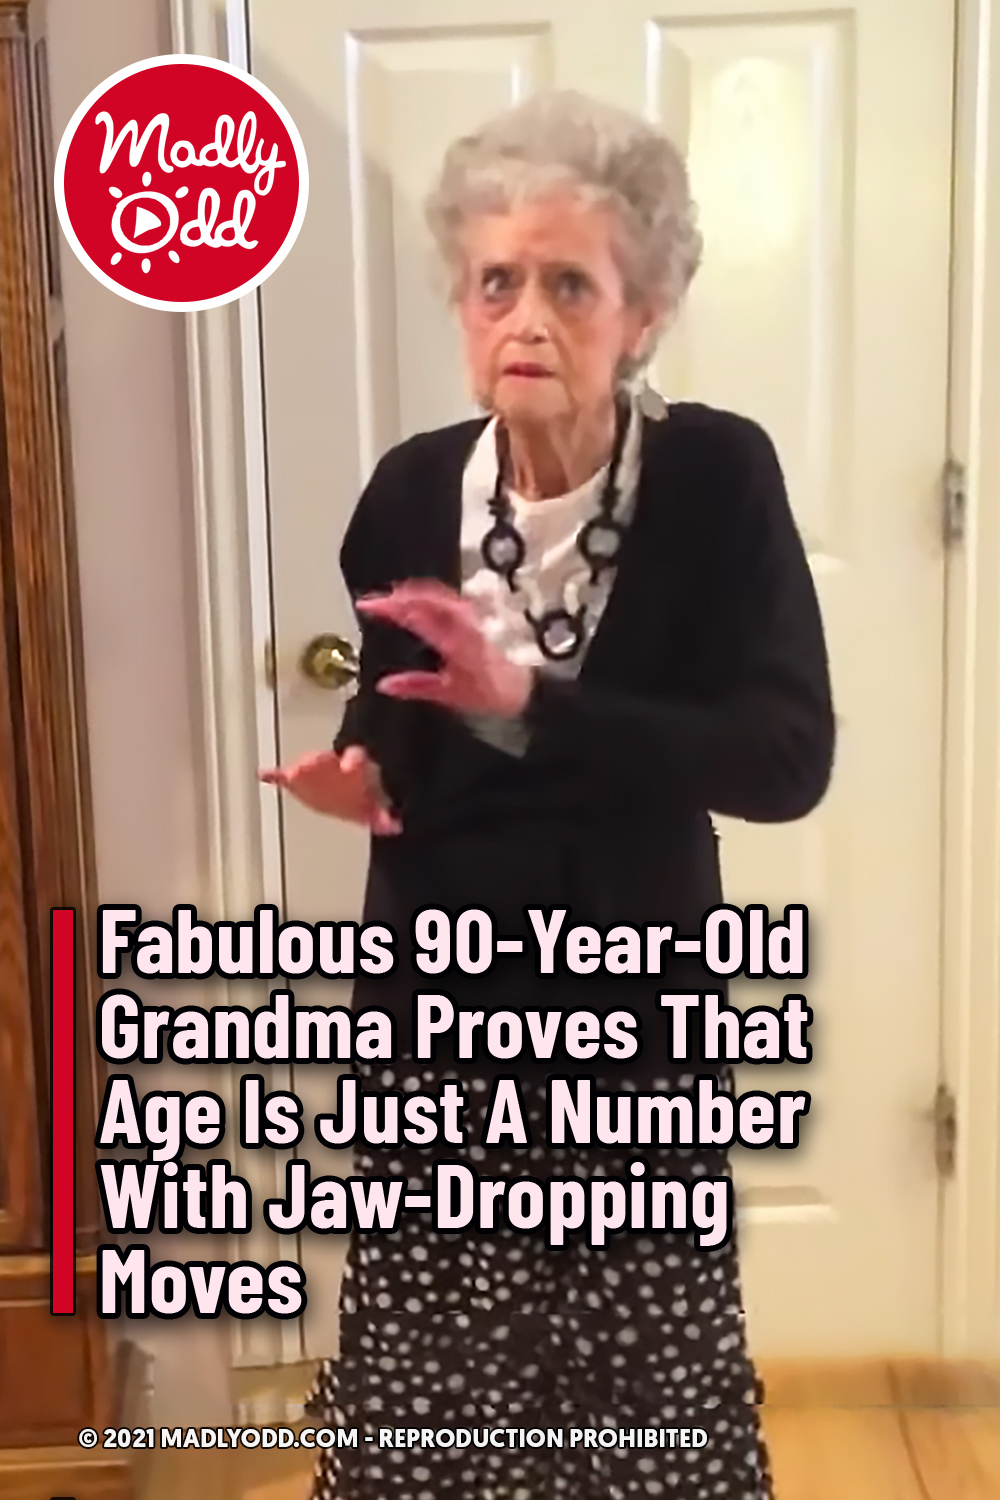 Fabulous 90-Year-Old Grandma Proves That Age Is Just A Number With Jaw-Dropping Moves